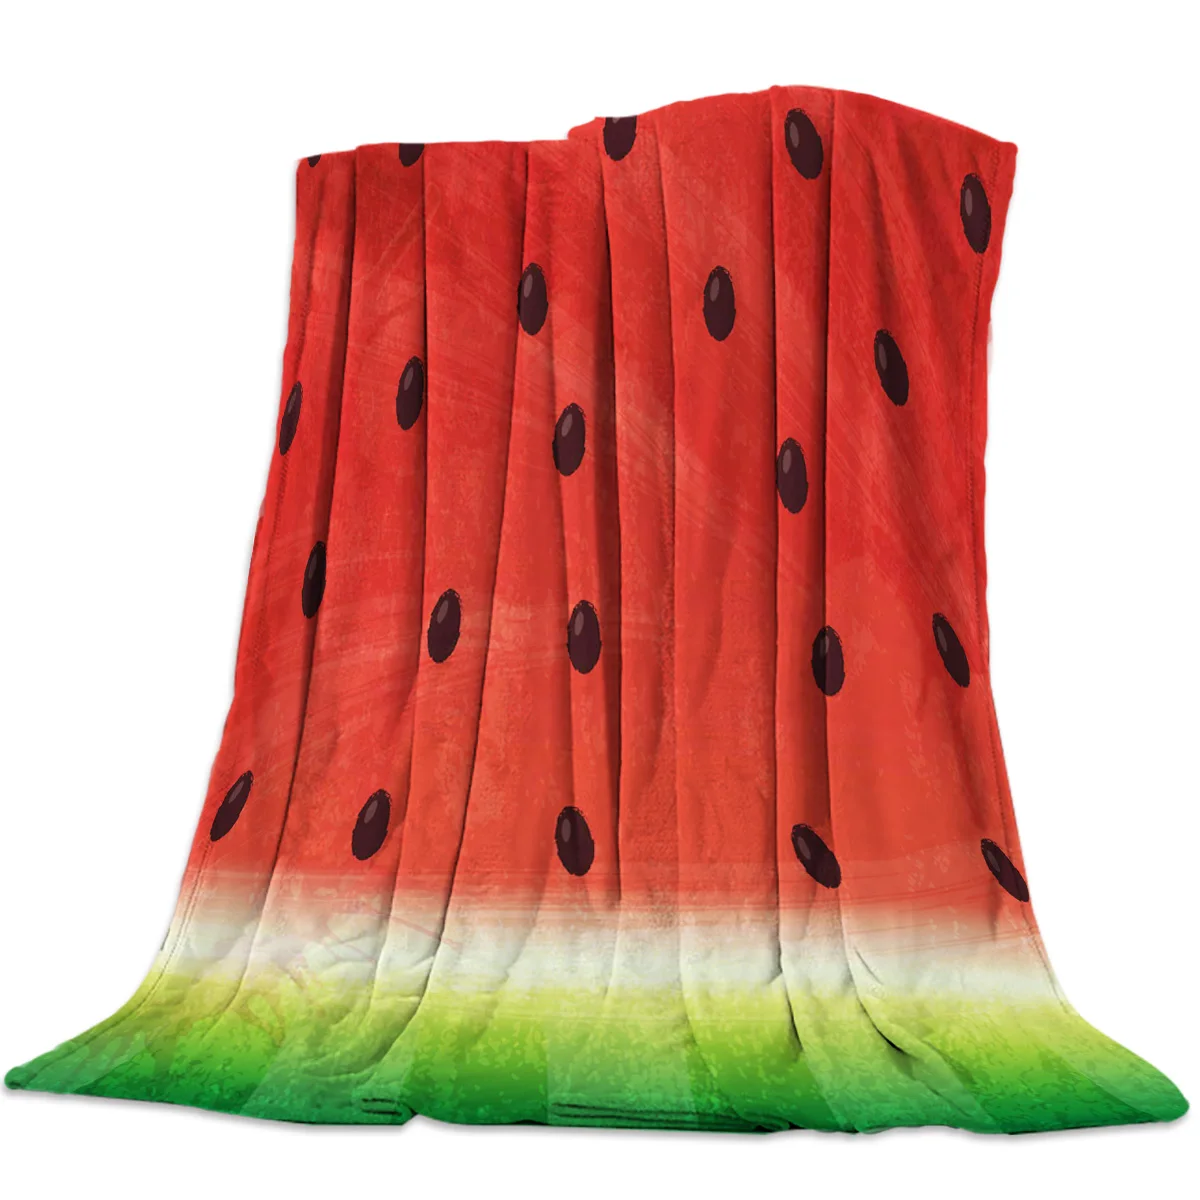 

Watermelon Fruit Print Flannel Cozy Warm Throw Blankets Fluffy Soft for Bed Sofa Nap Rug Plush Portable Camping Travel Blanket